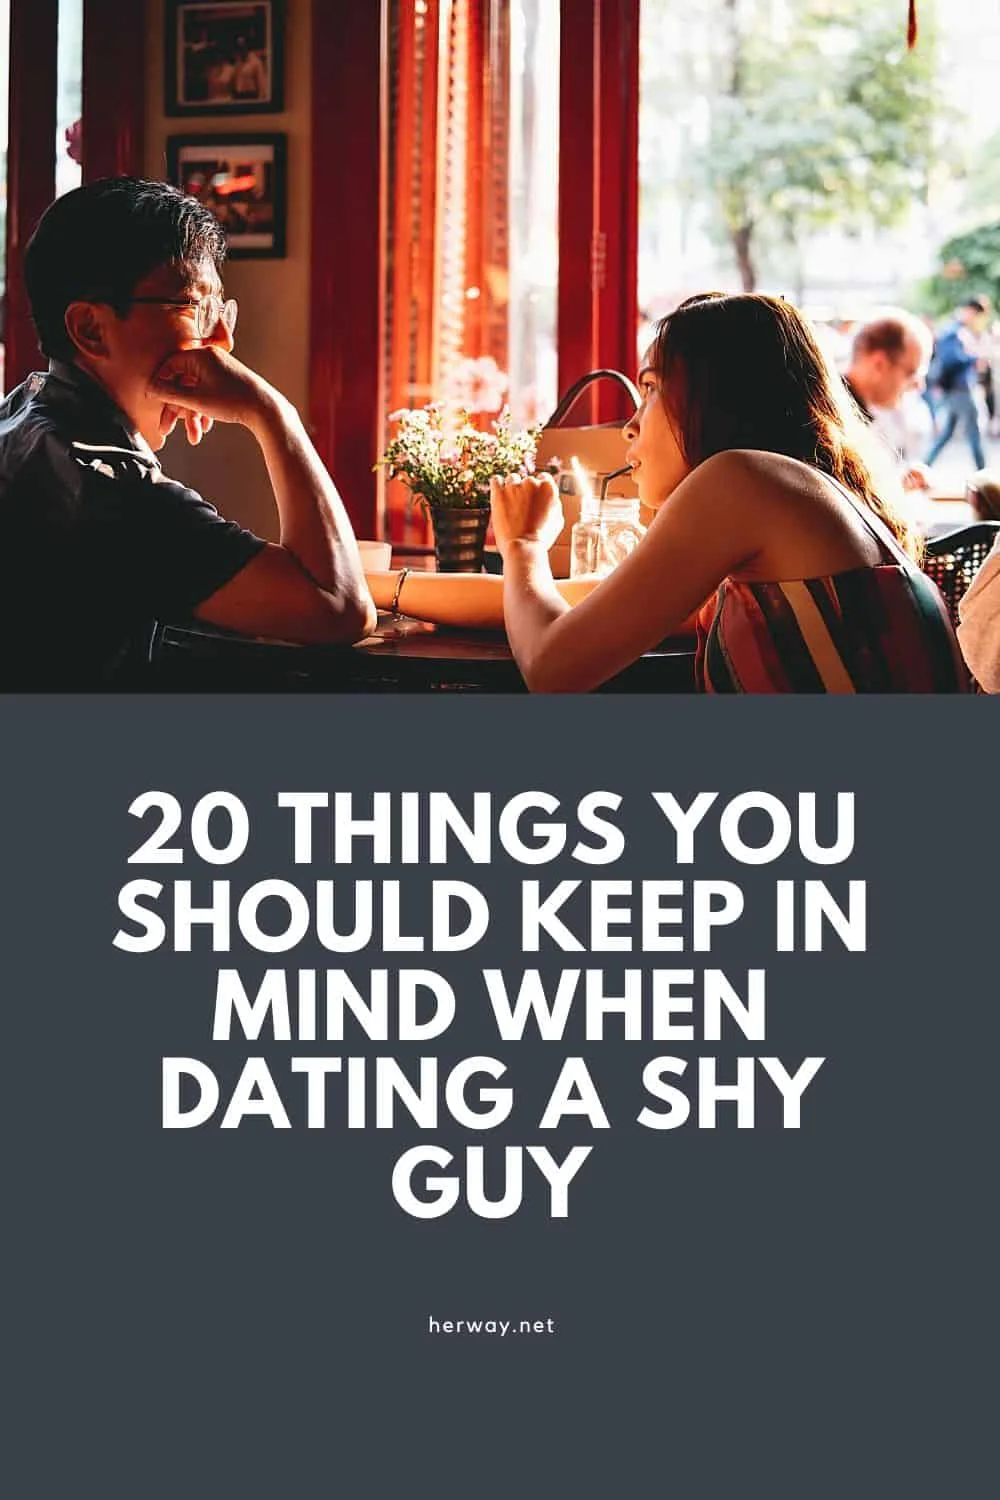 20 Things You Should Keep In Mind When Dating A Shy Guy